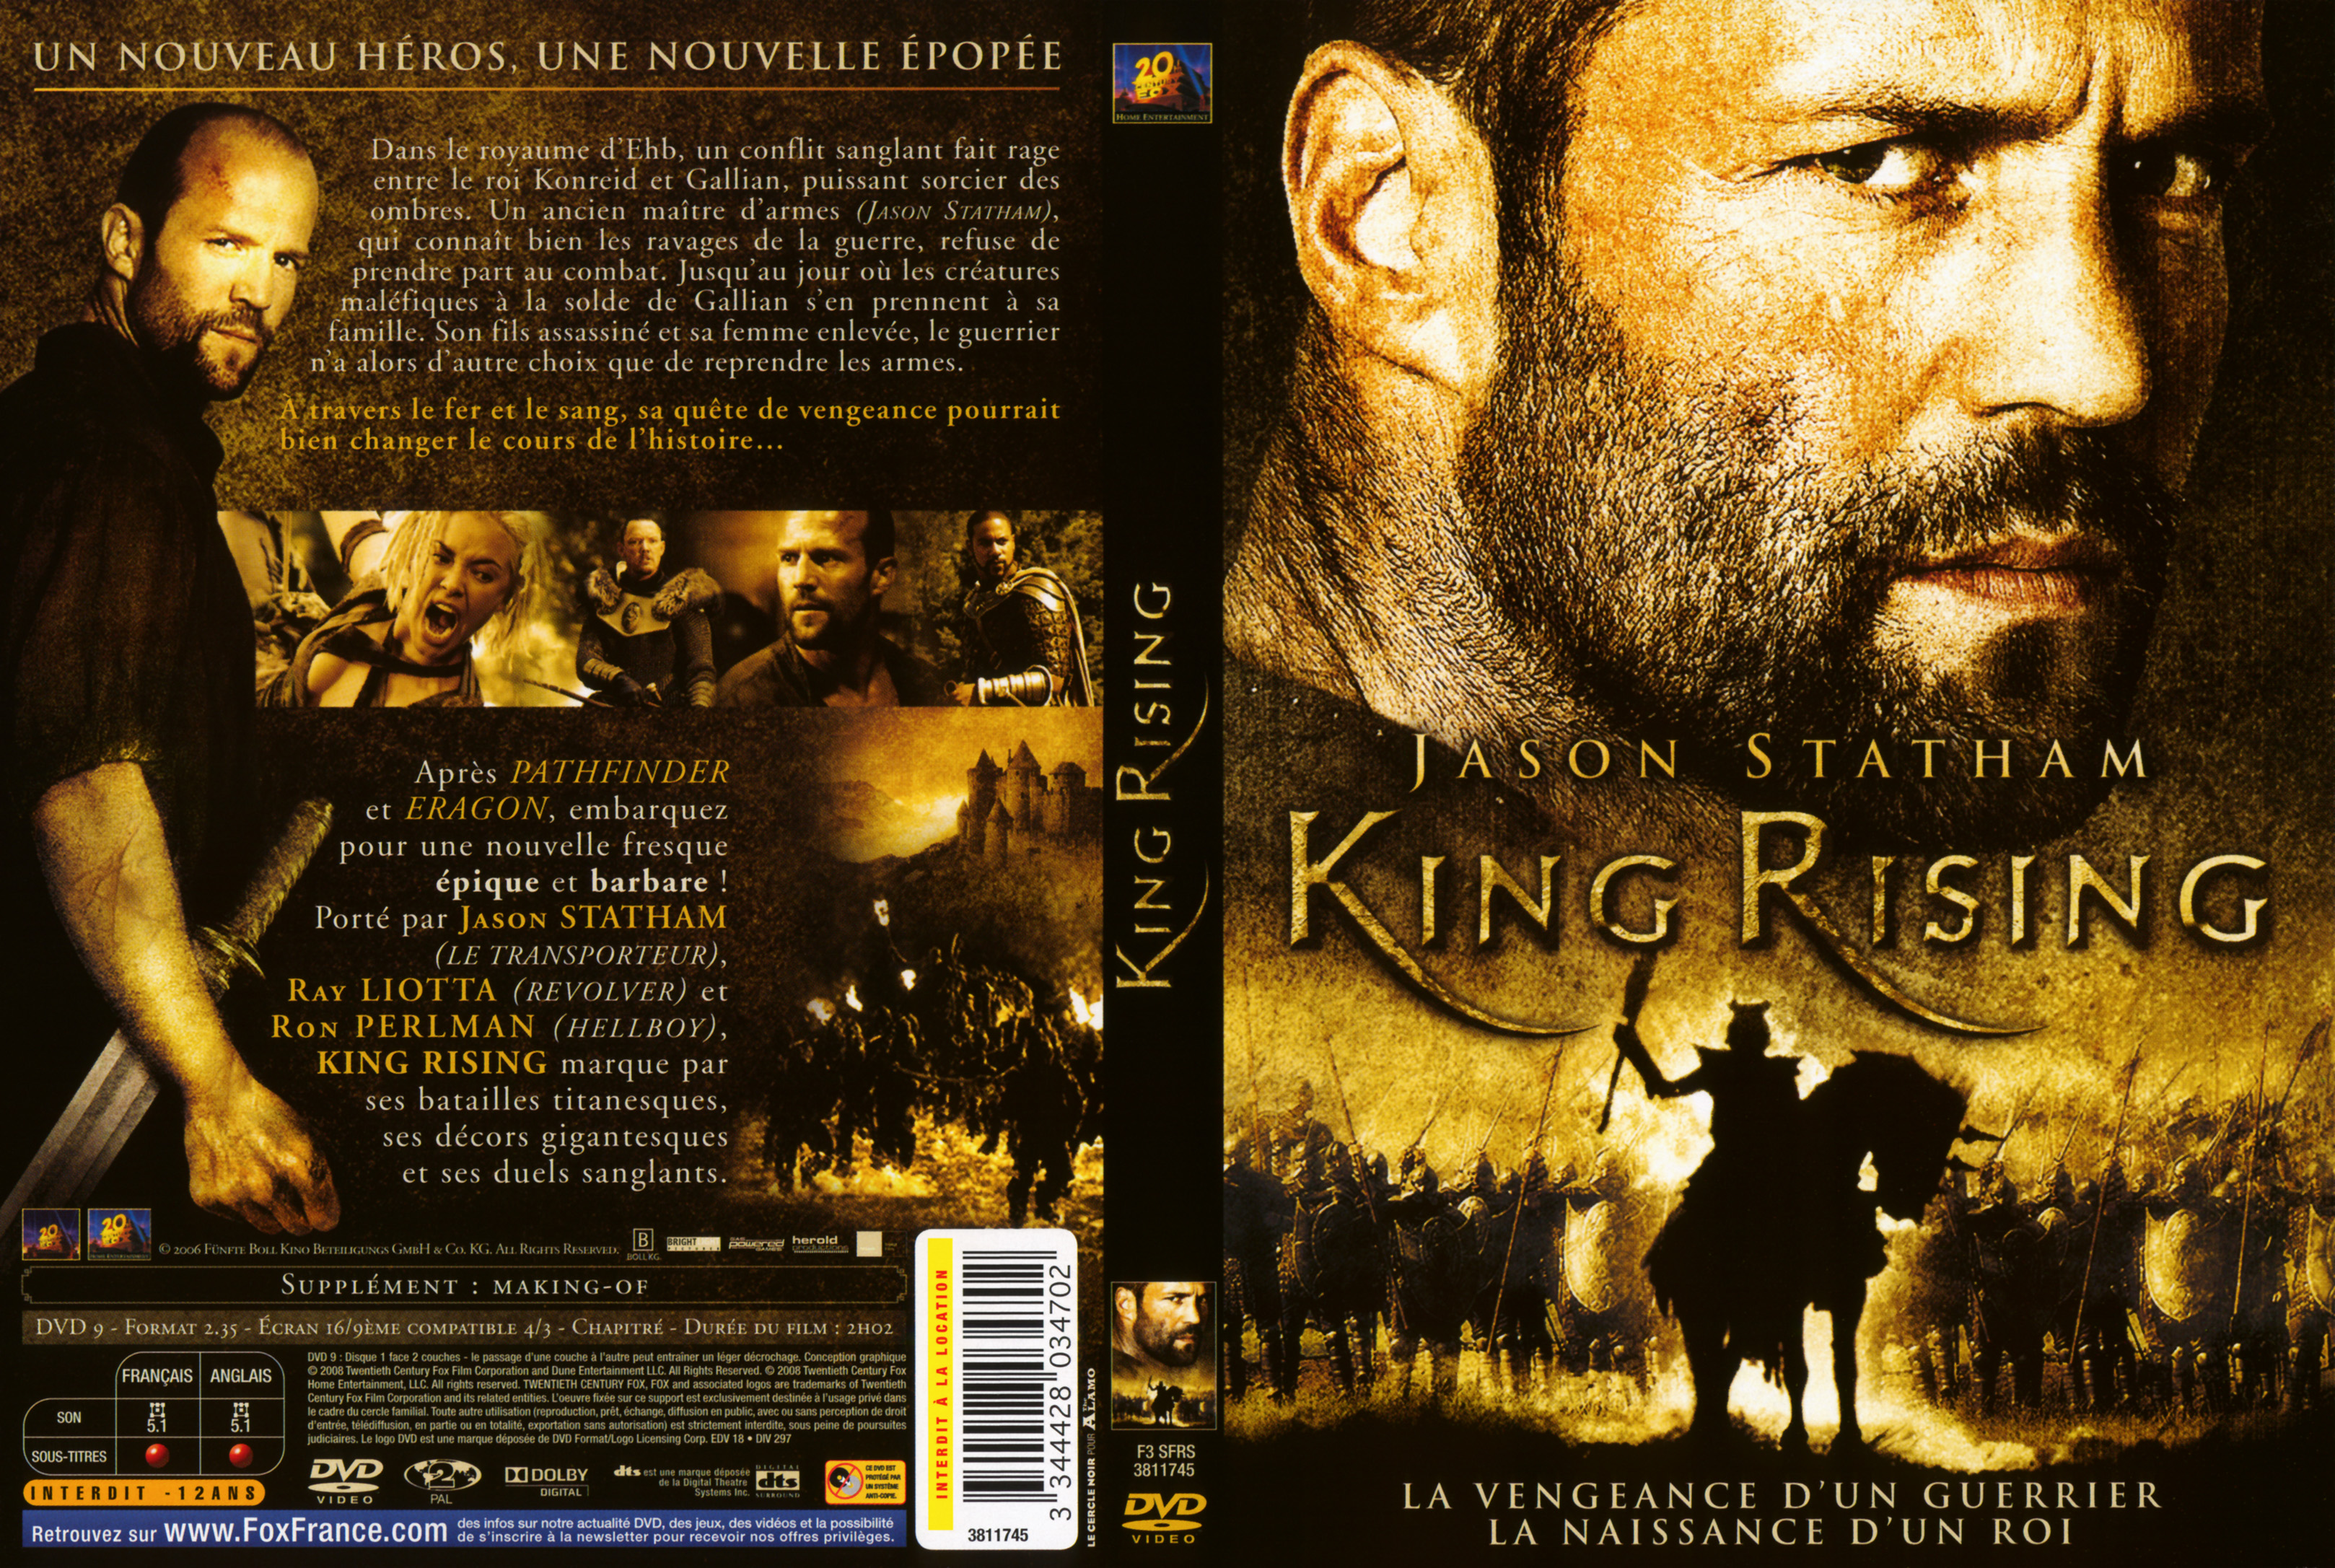 Jaquette DVD King Rising